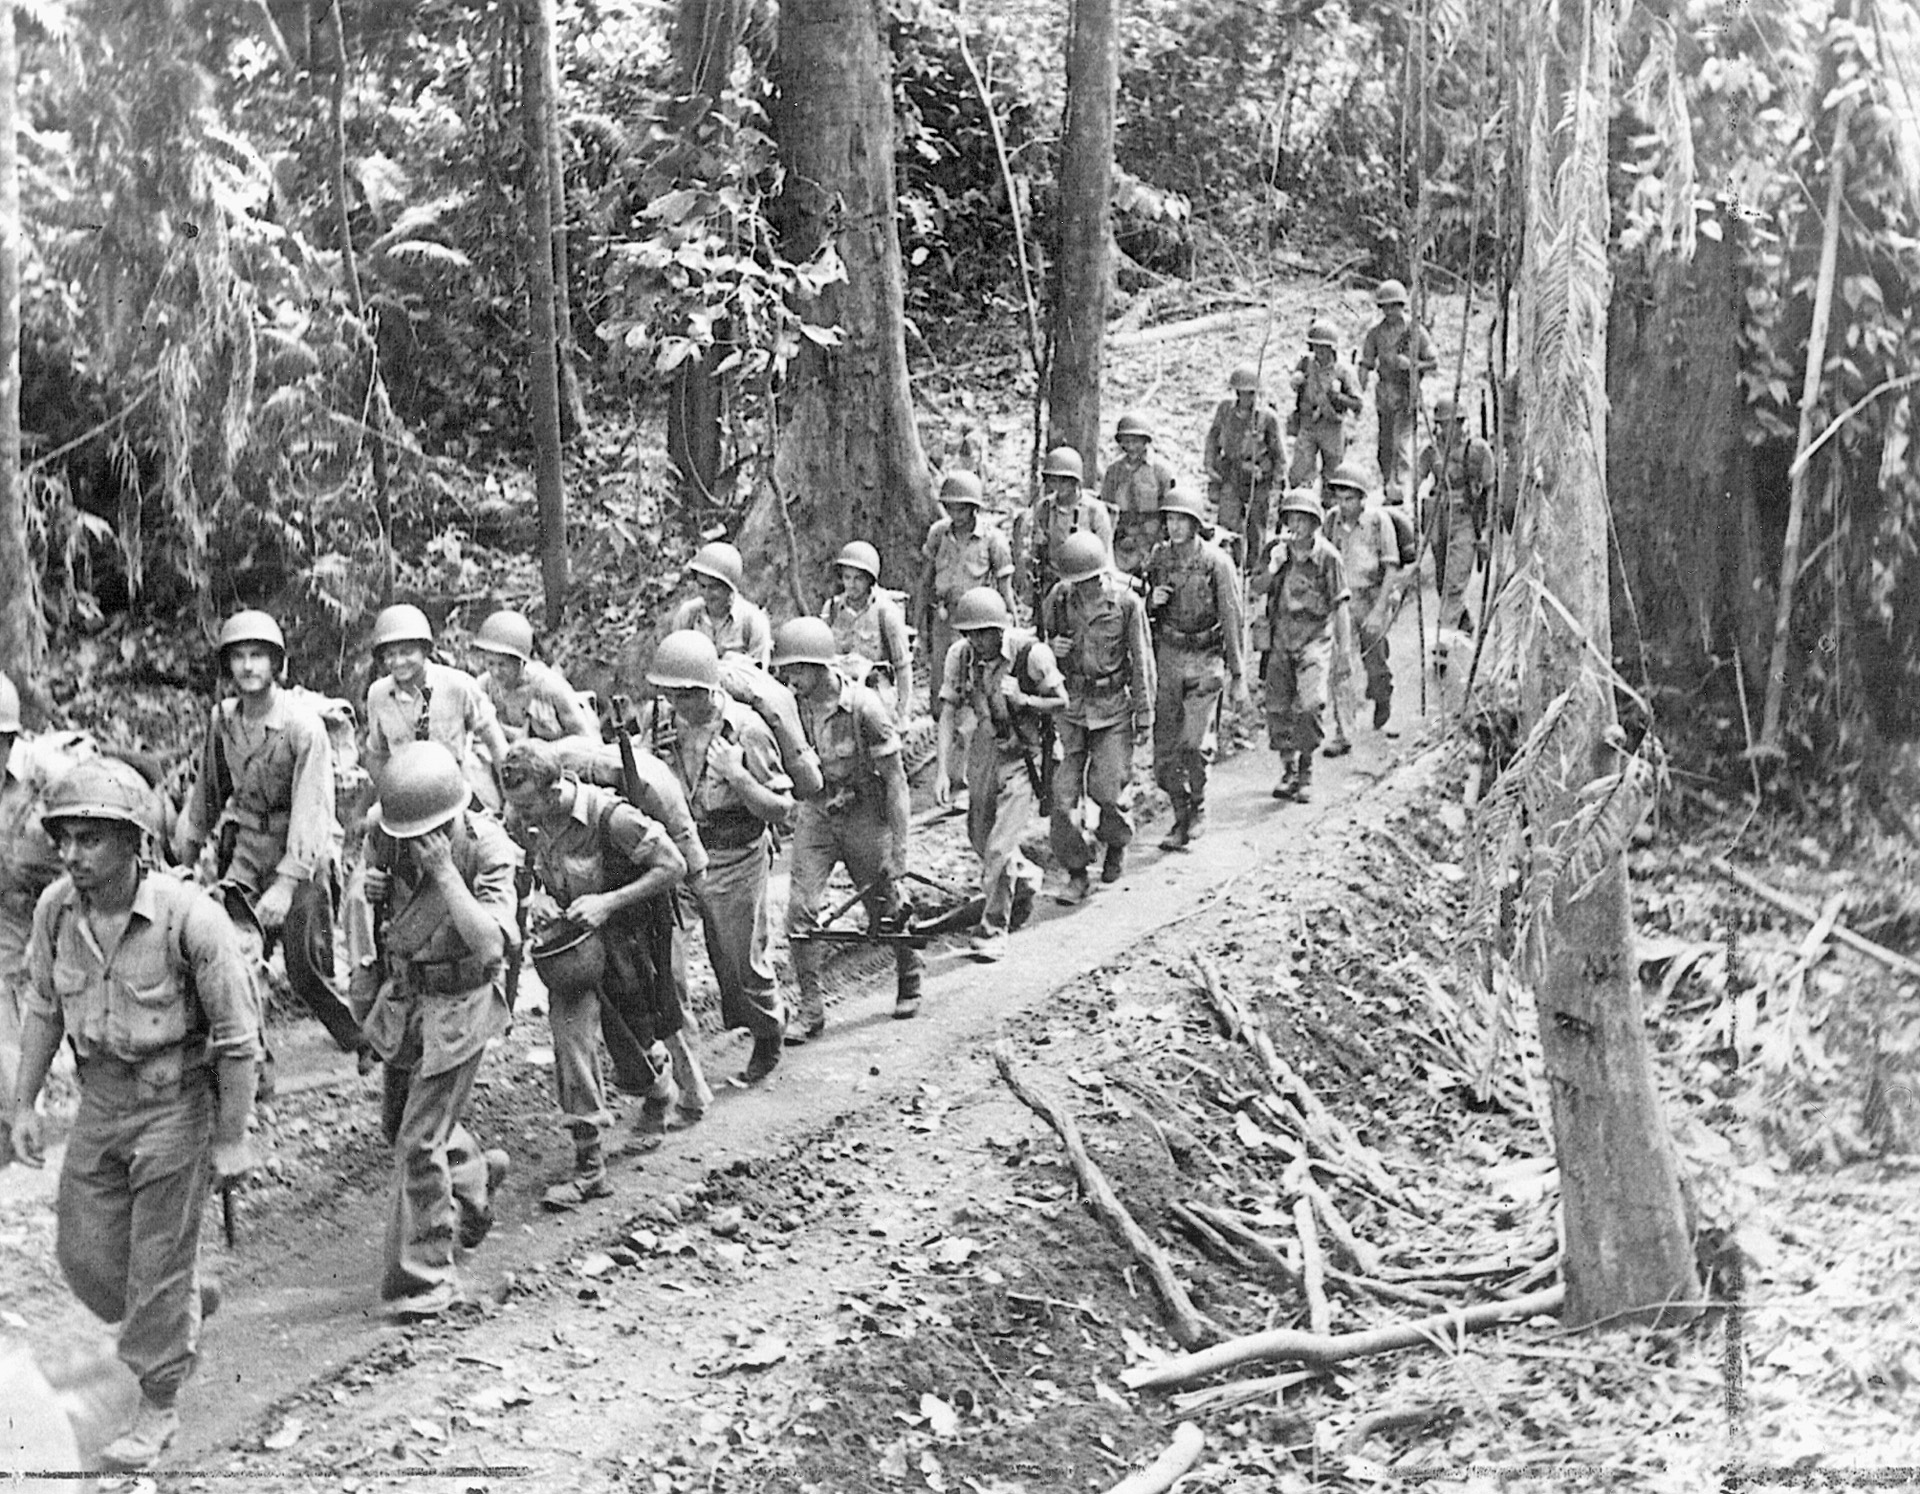 Advancing Marines move through dense jungle on their way to new positions on Guadalcanal.